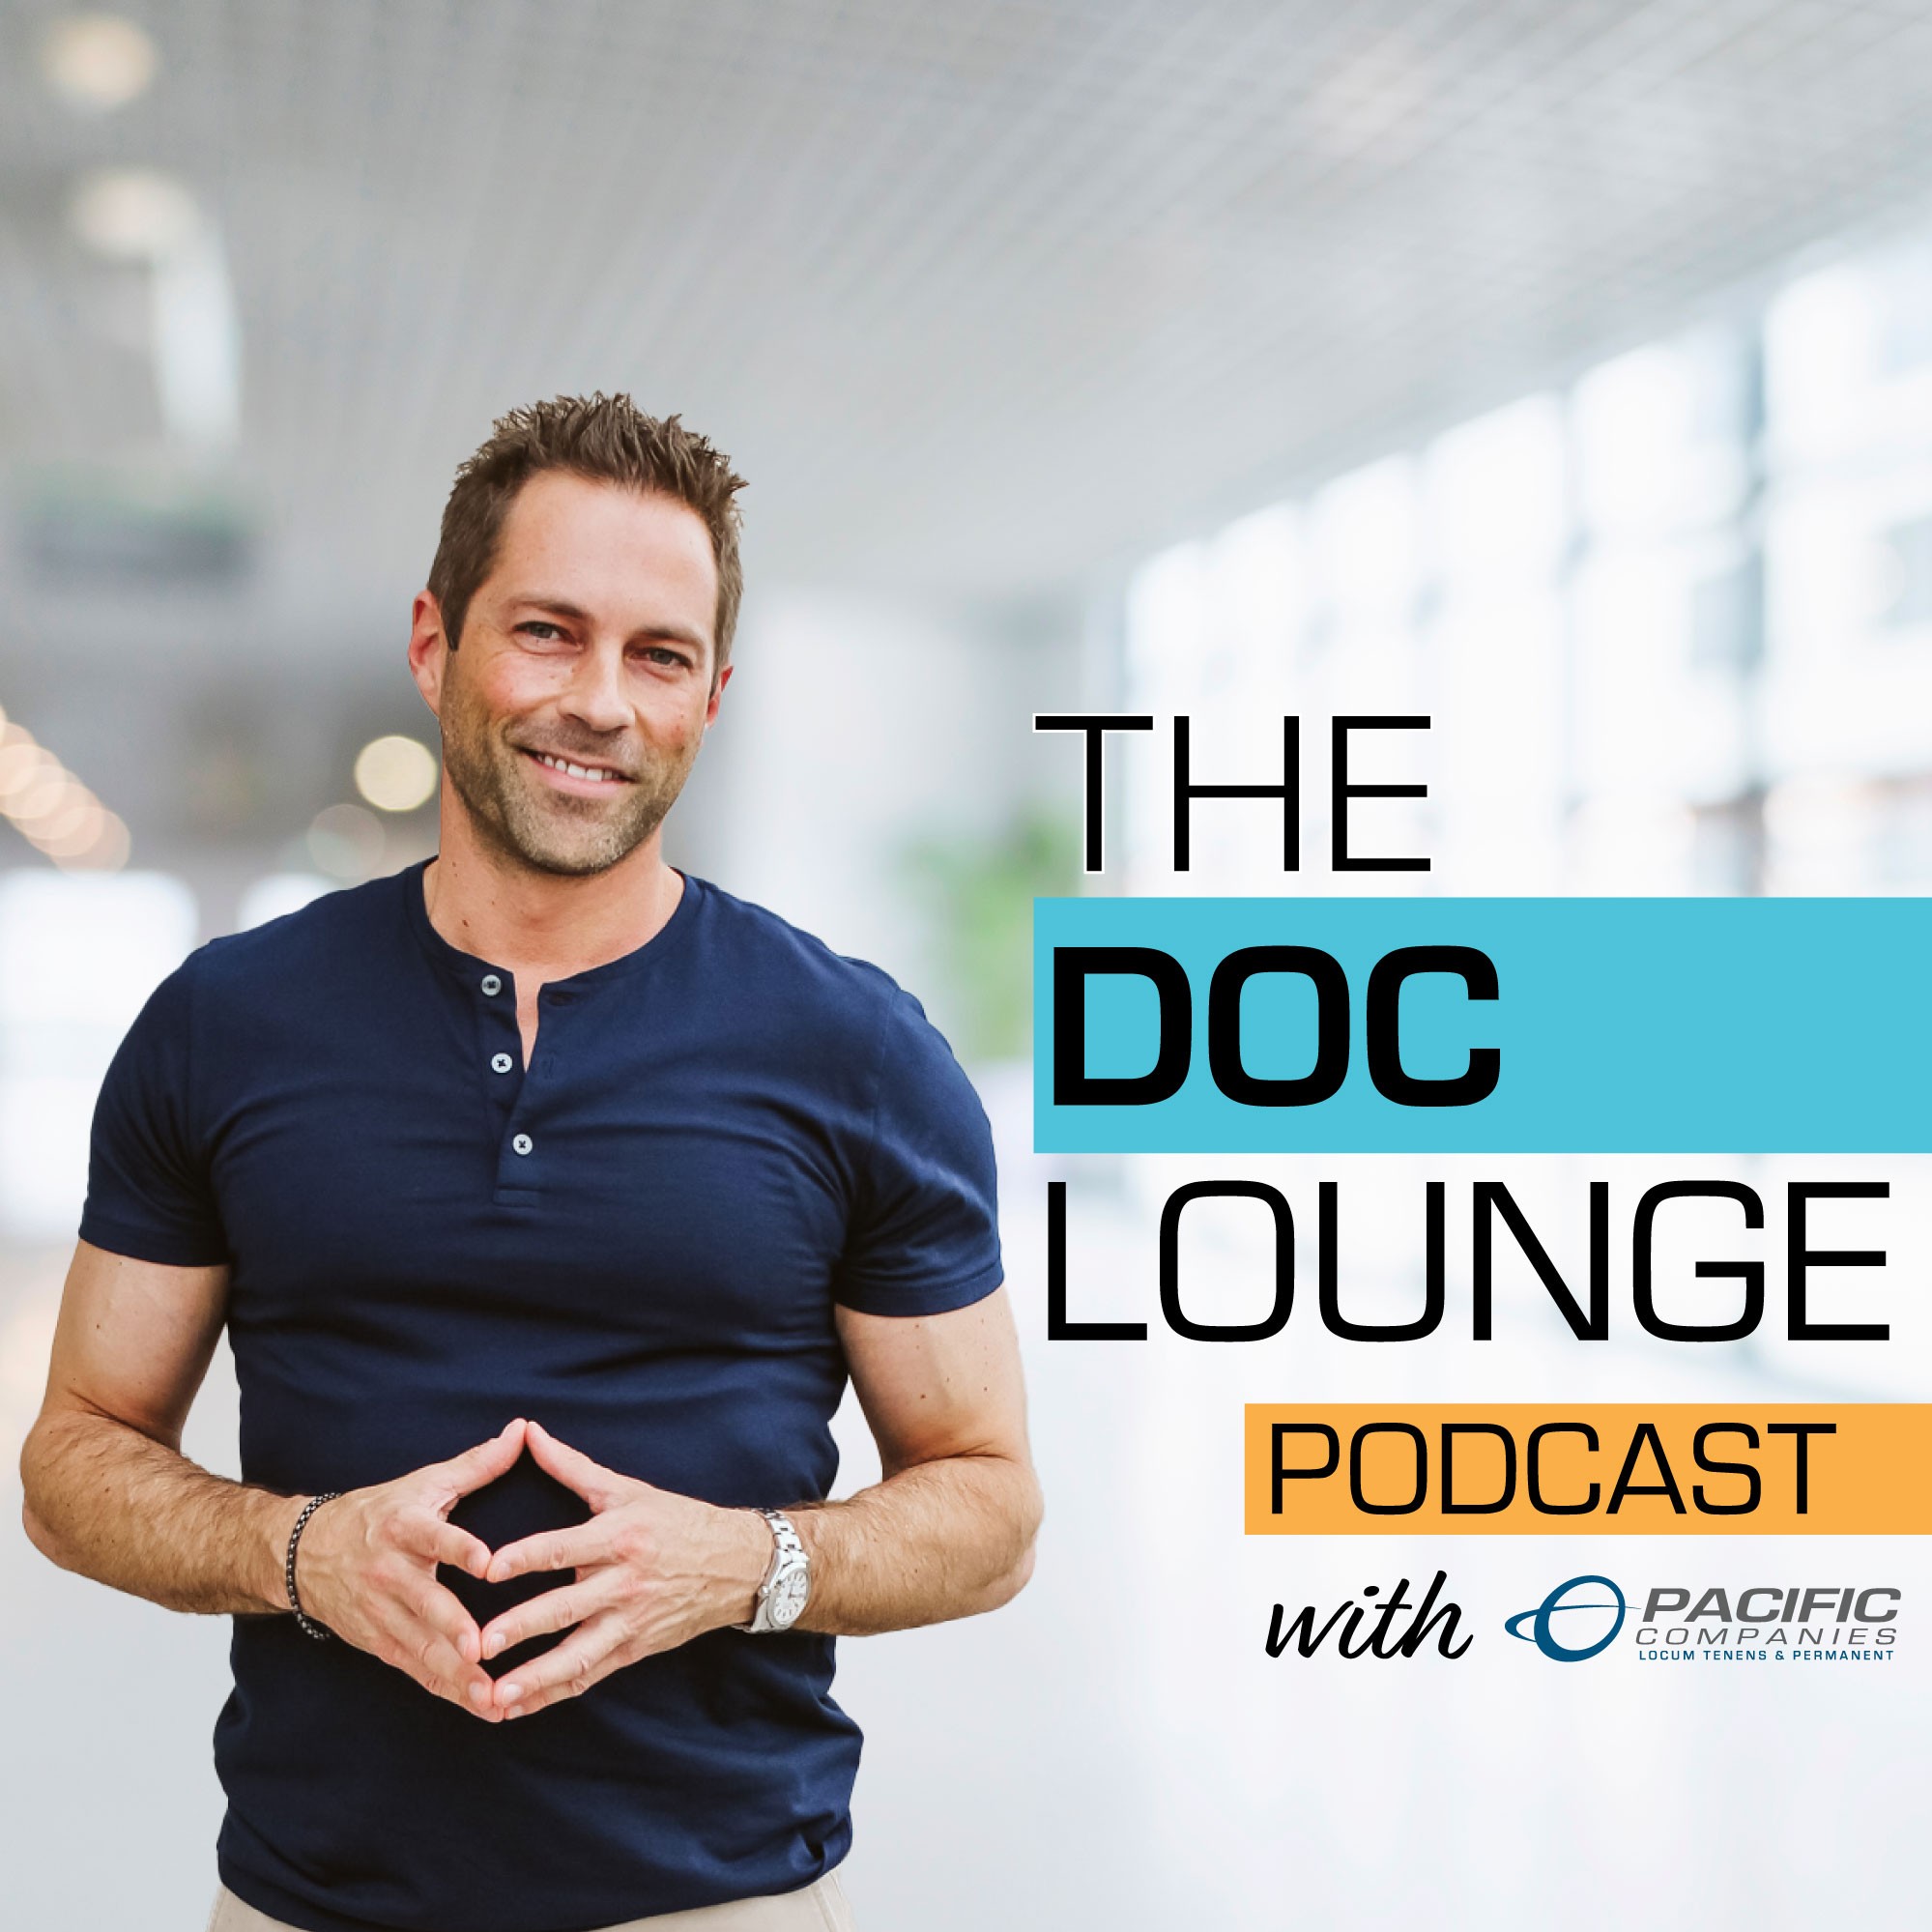 Provider’s Perspective with Dr. Jordan Cooper, DDS, Entrepreneur and Bestselling Author of Chasing the Blue Marlin